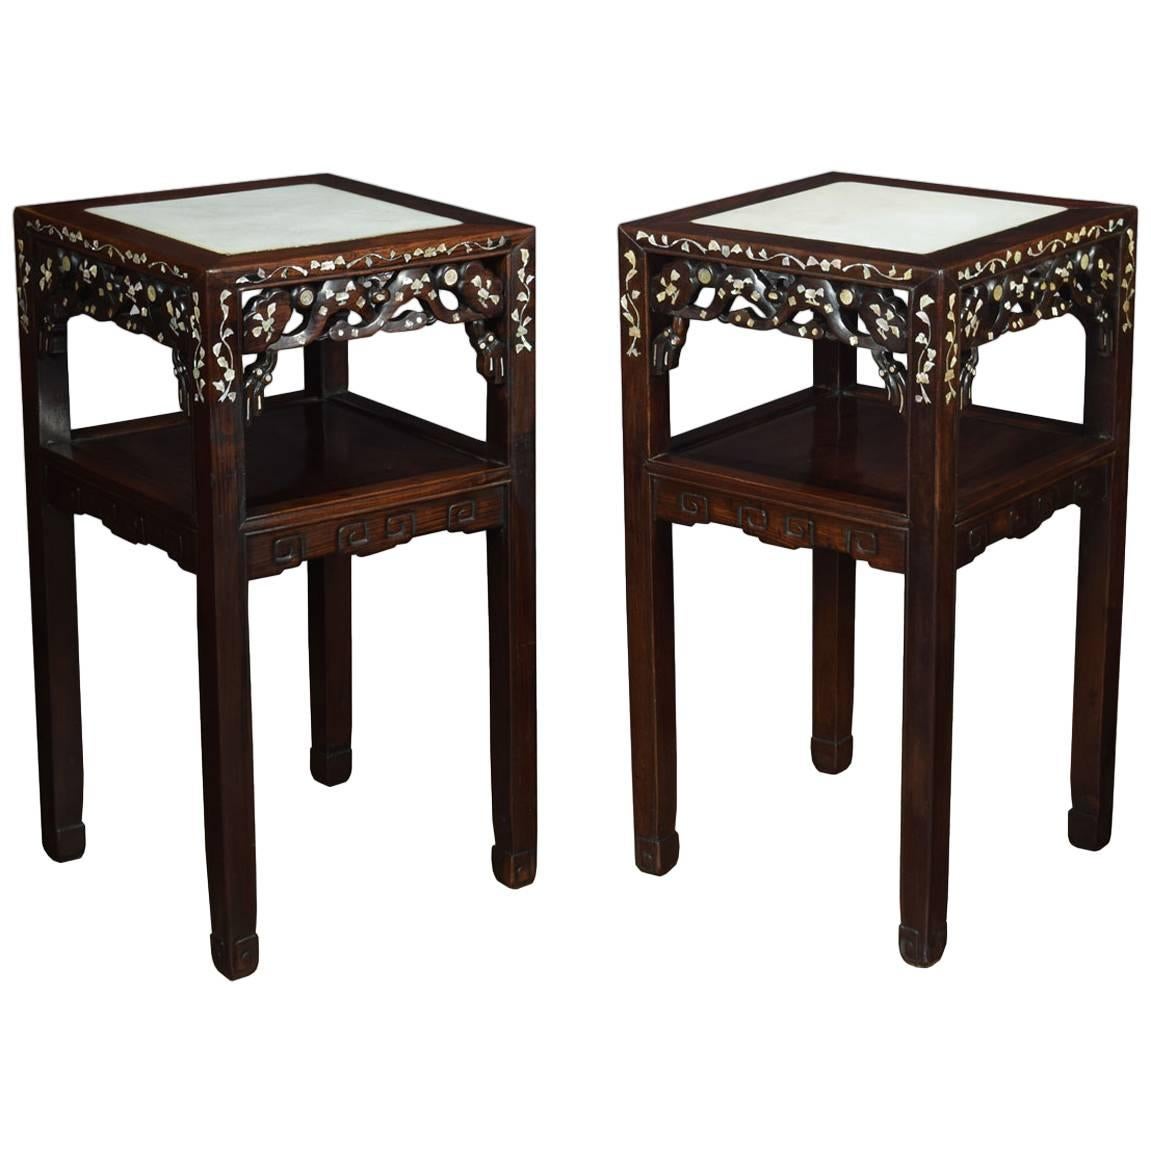 Pair of Chinese Inlaid Urn Stands